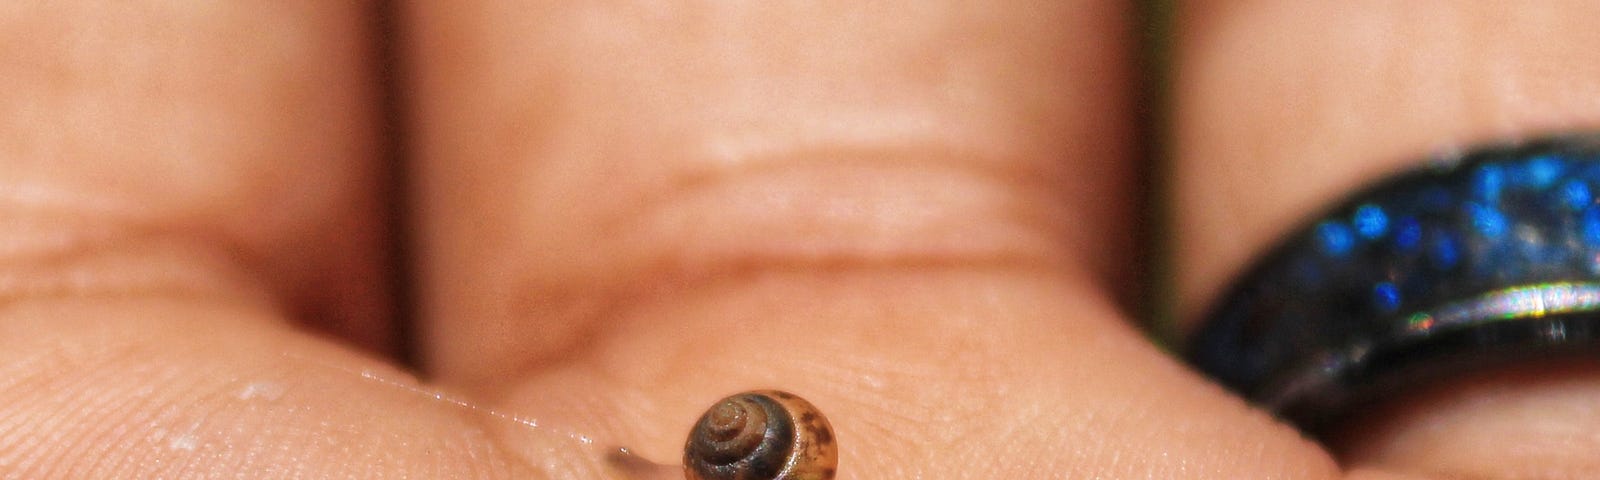 Tiny snail on a zoomed in picture of a hand